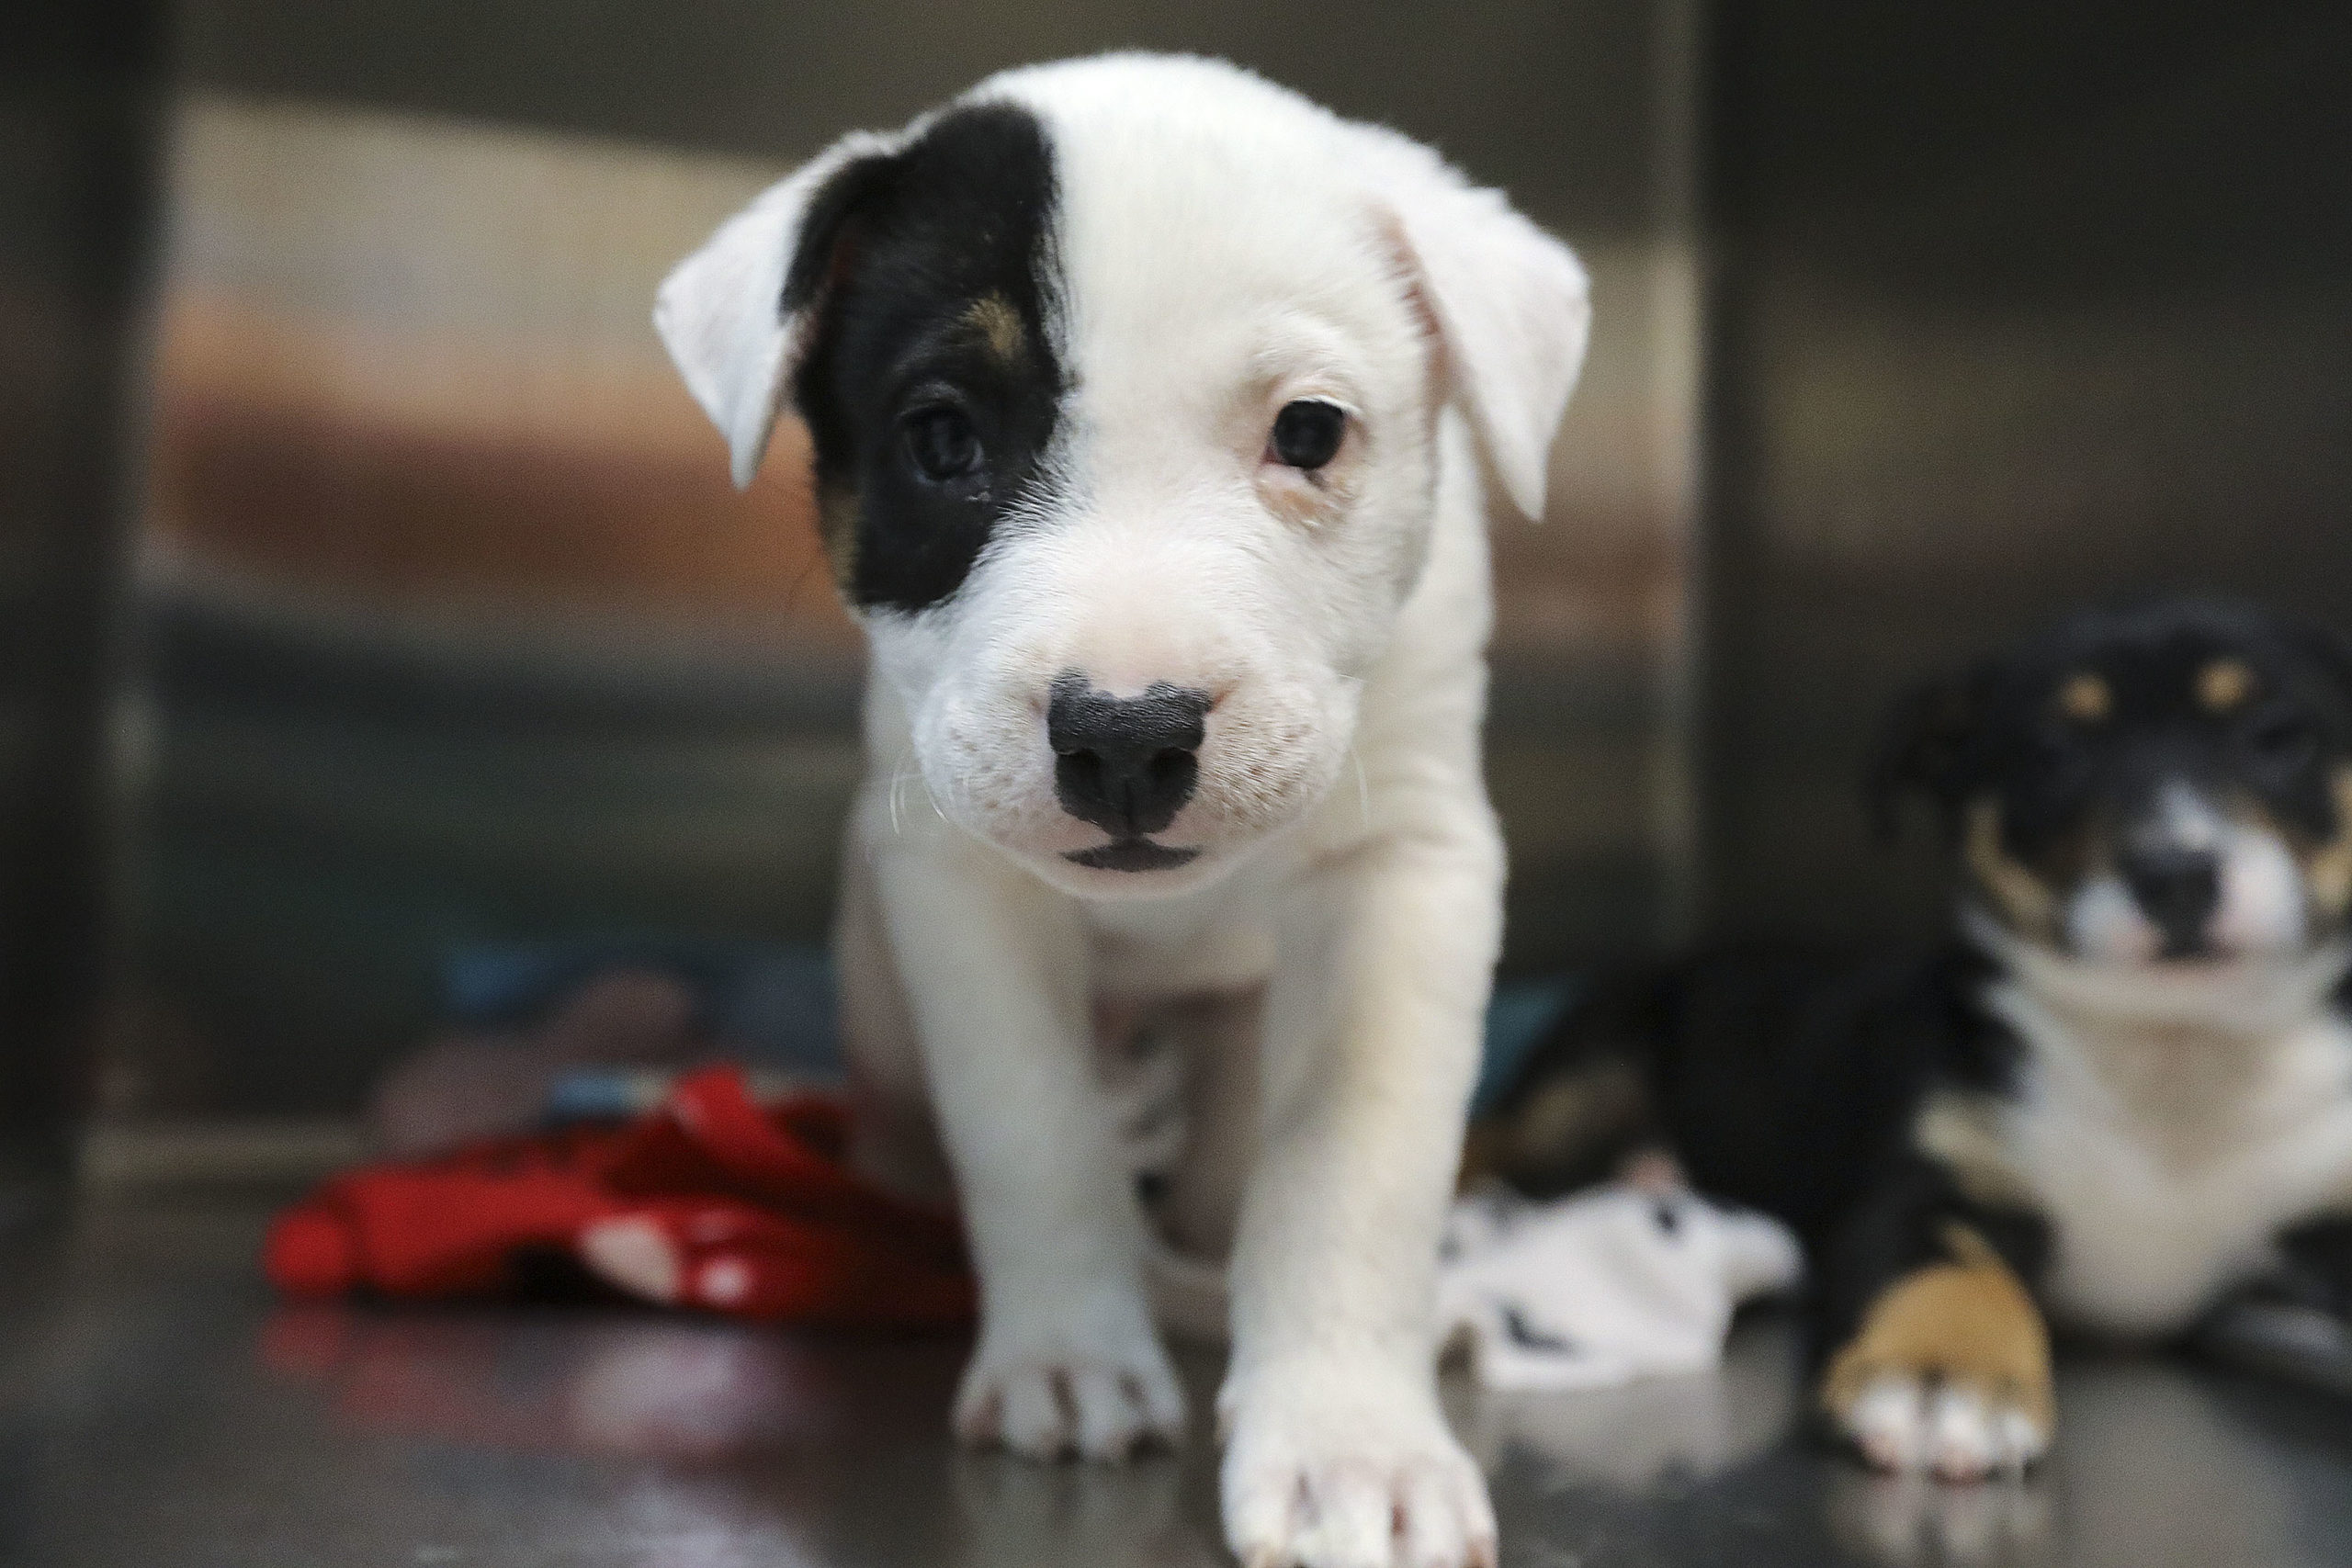 US animal shelters are filling up